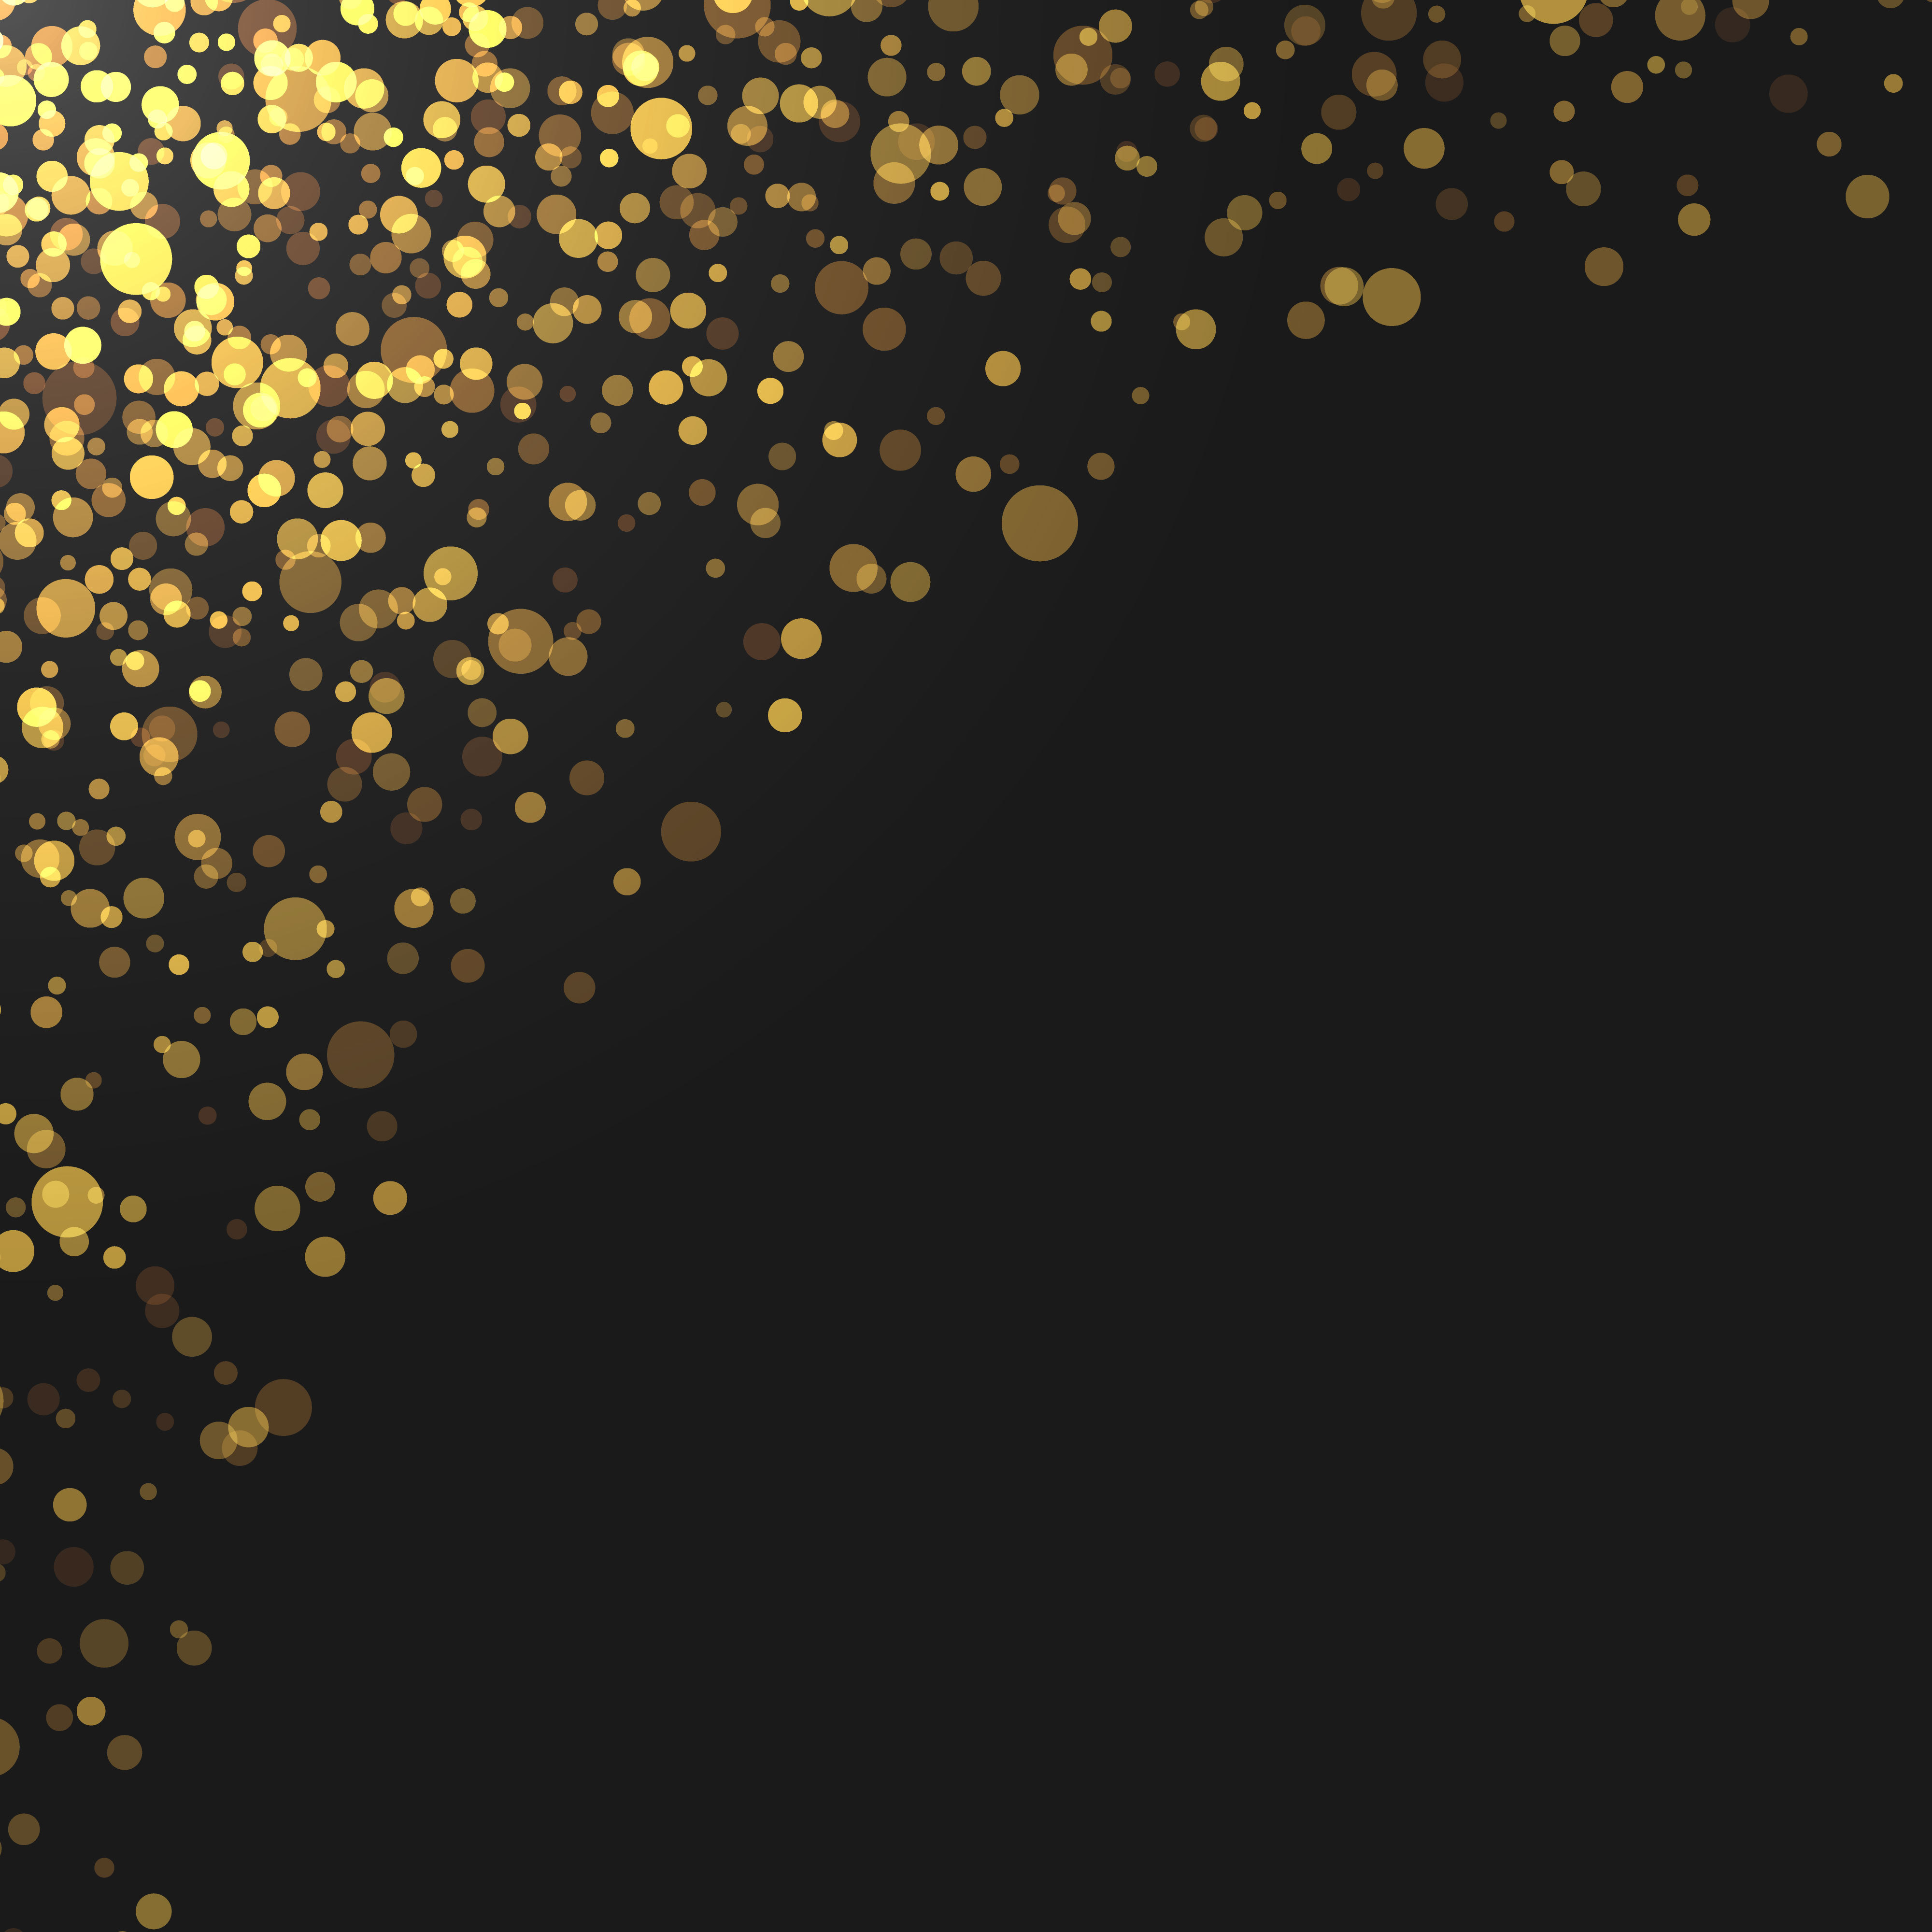 gold glitter particles background effect for luxury greeting rich card. gold glitter particles background effect Template for your design